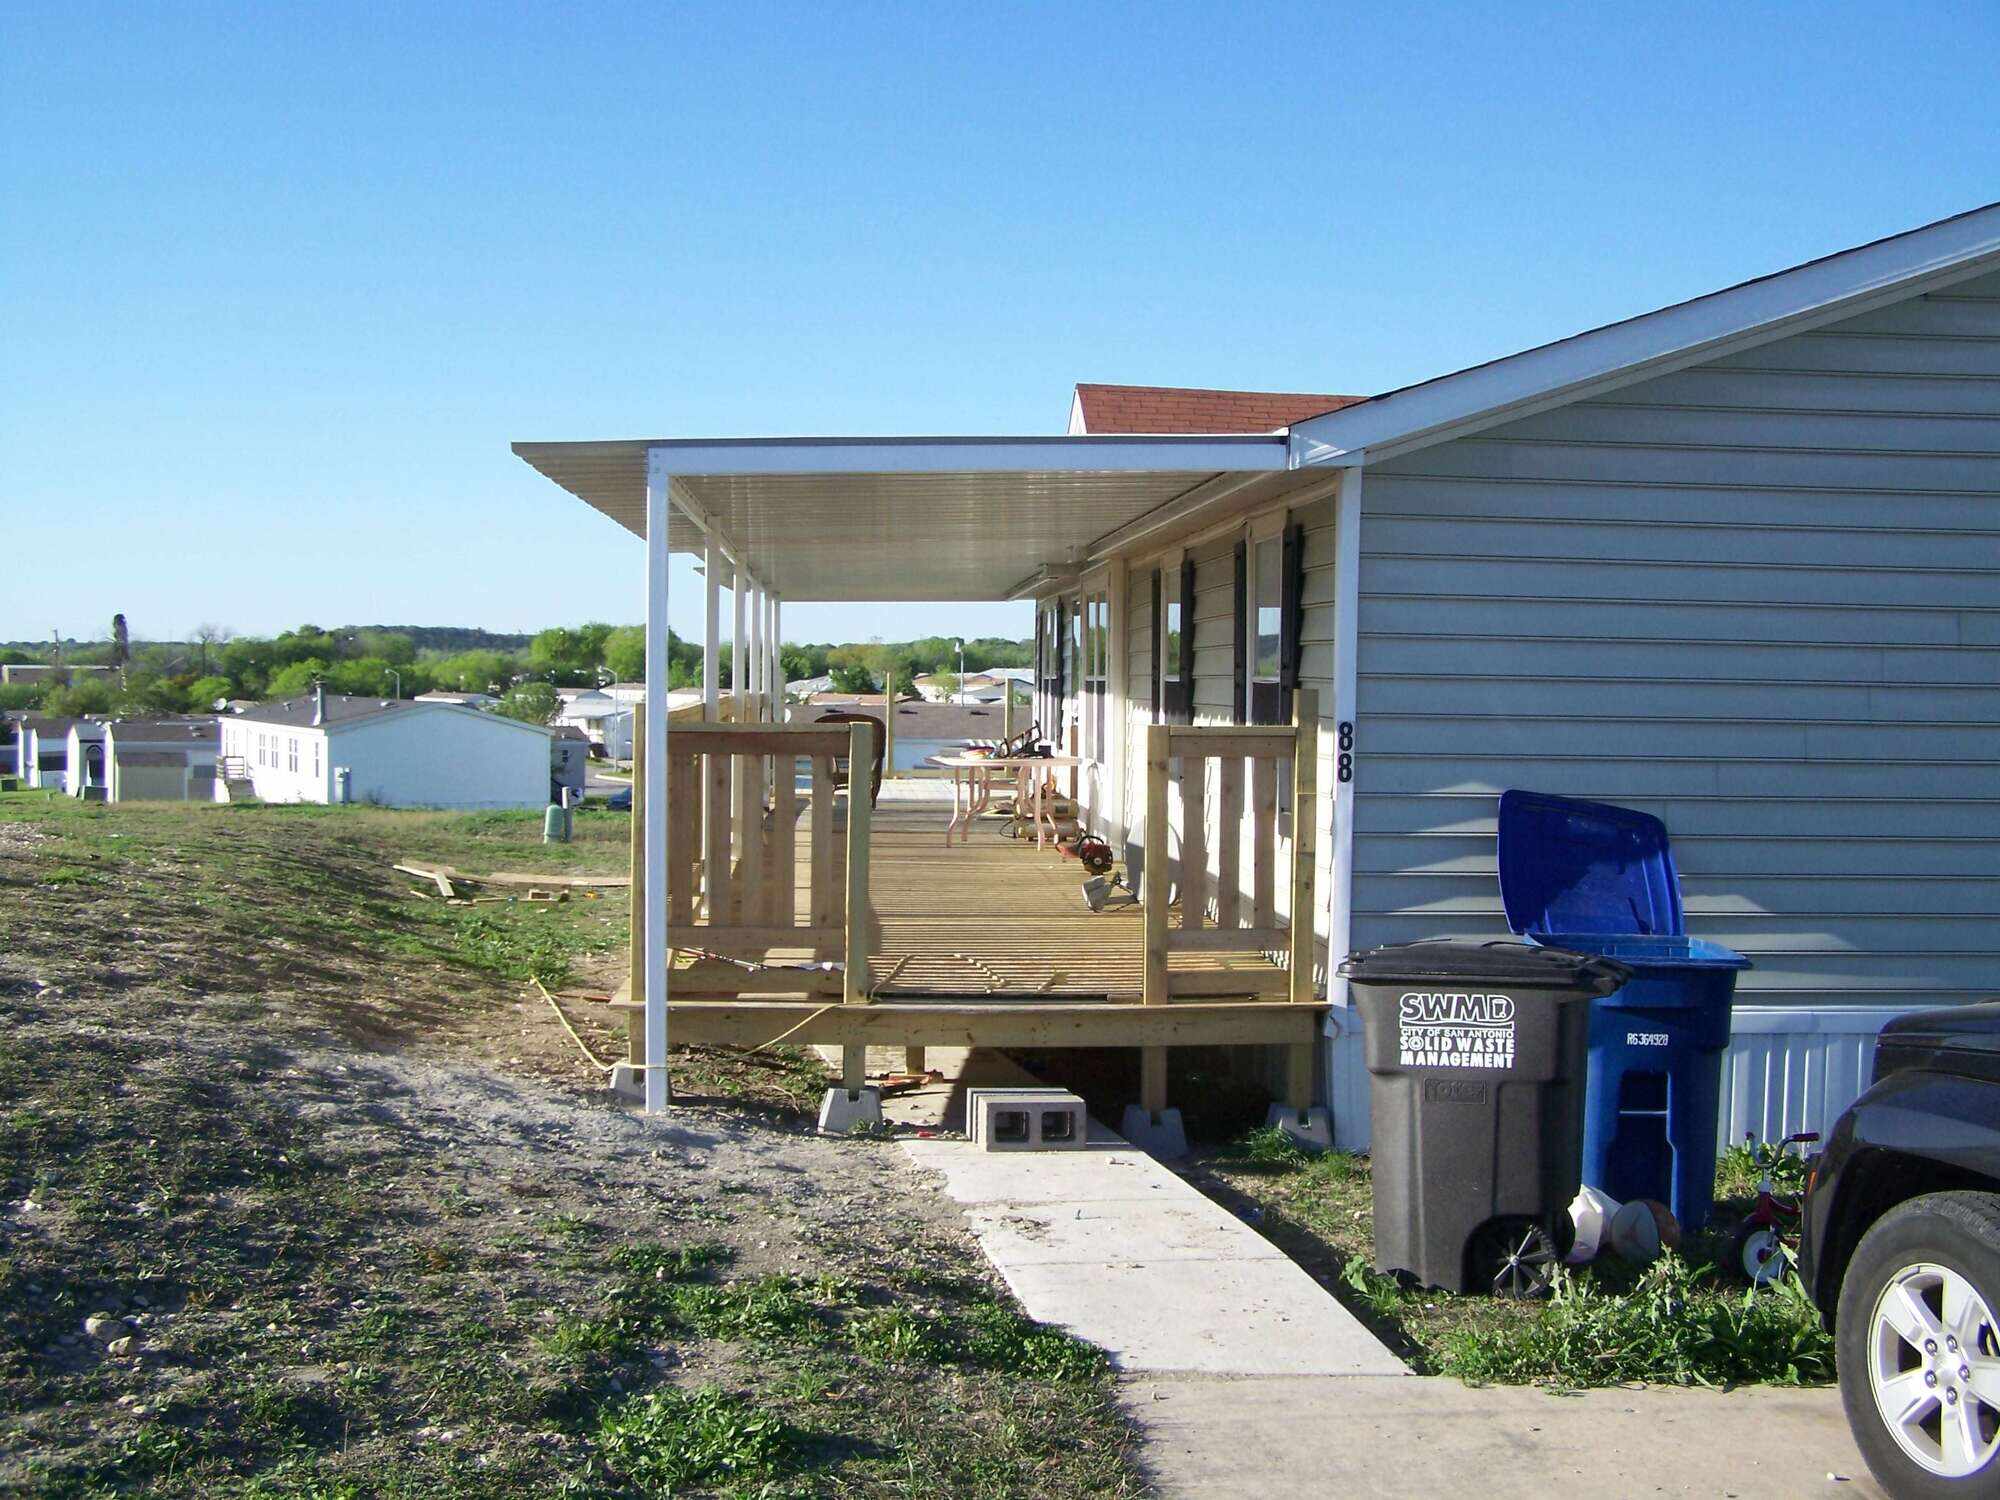 How To Install An Awning On A Mobile Home